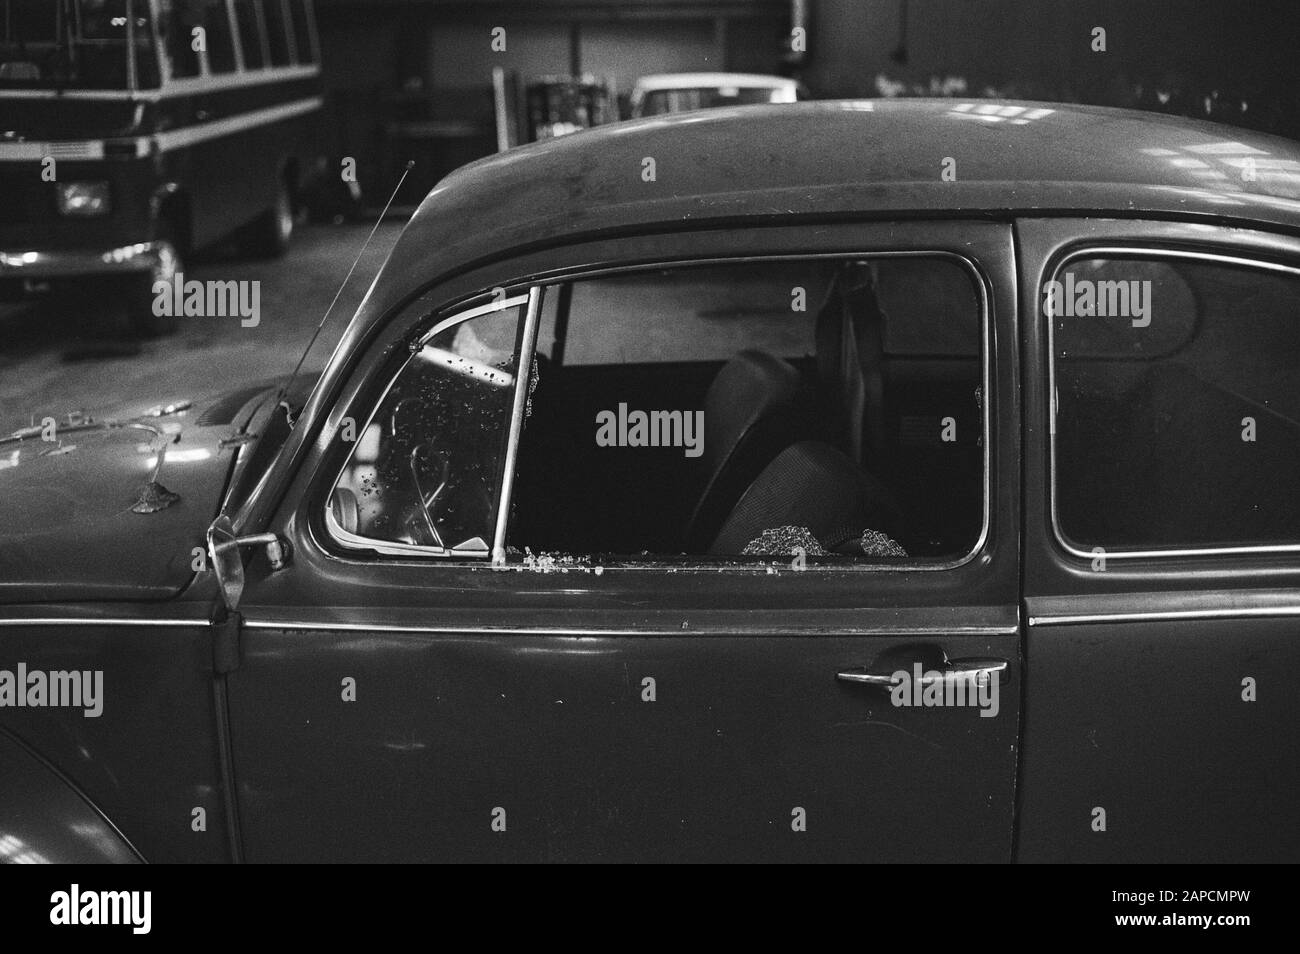 Auto (a VW beetle) of Ahmet Benler, son of Turkish ambassador Özdemir Benler, shot dead in The Hague. The attack was claimed by the Armenian terror organization Asala Description: attacks, ambassadors, sons, terrorism, cars, Benler, Ahmet, Benler, Özdemir Date: October 12, 1979 Location: The Hague, South Holland Keywords: attacks, ambassadors, cars, terrorism, sons Personal name: Benler, Ahmet, Benler, Özdemir Stock Photo